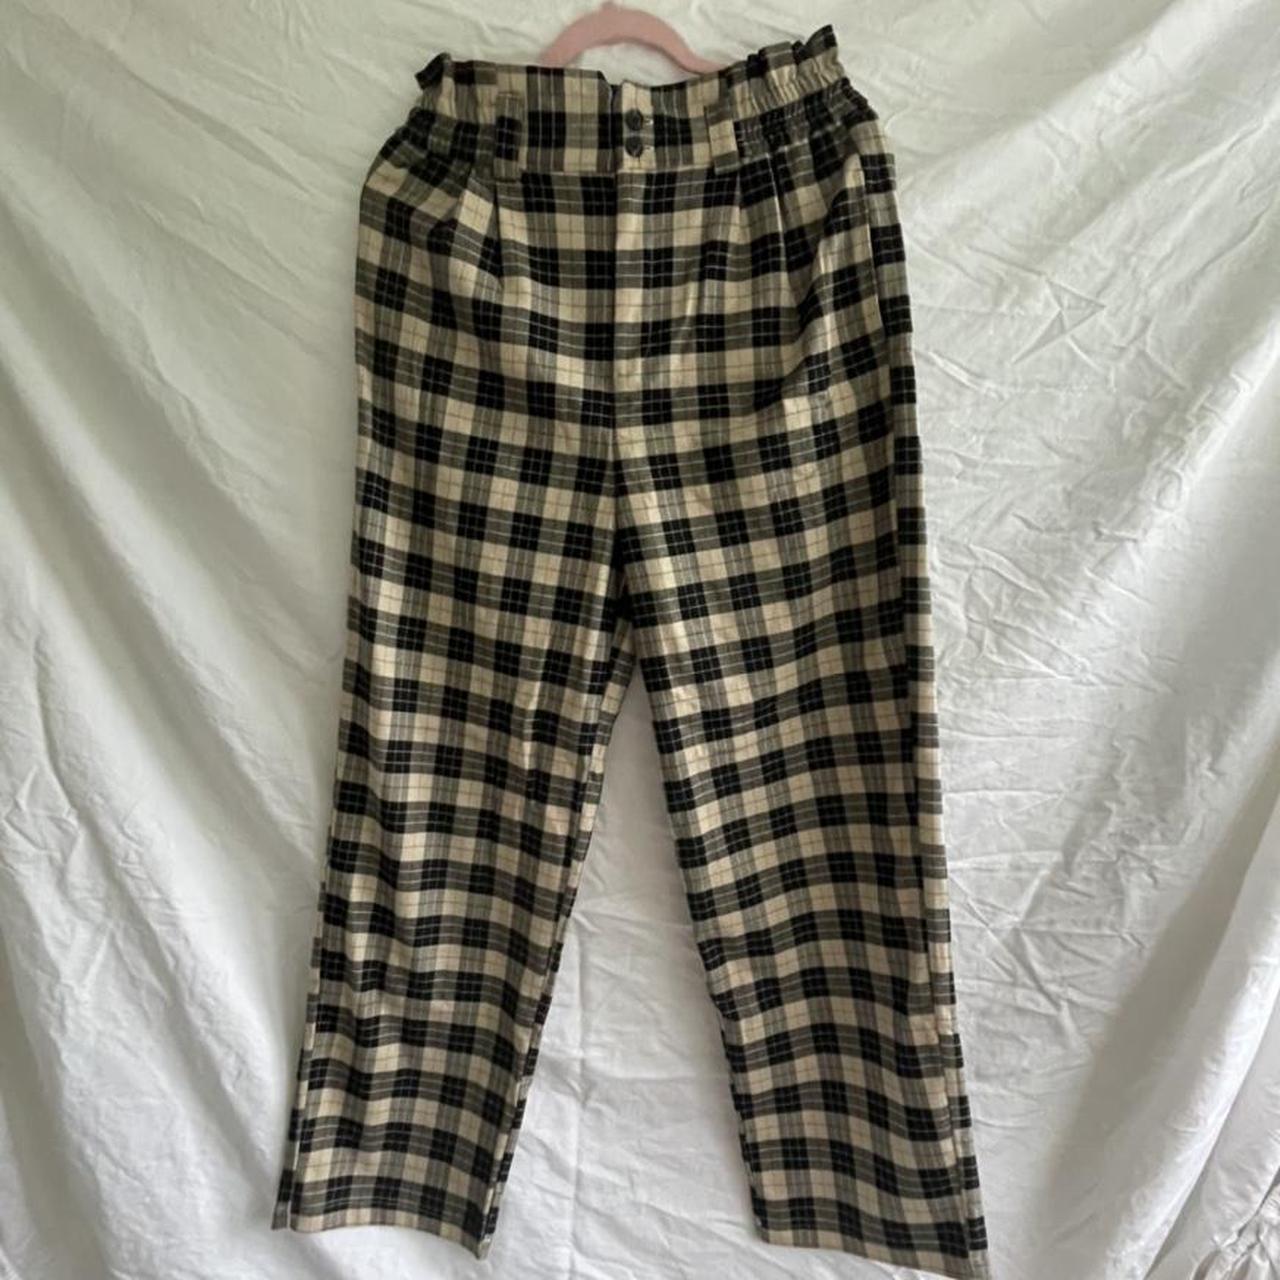 Urban outfitters wide leg trousers Size medium but... - Depop